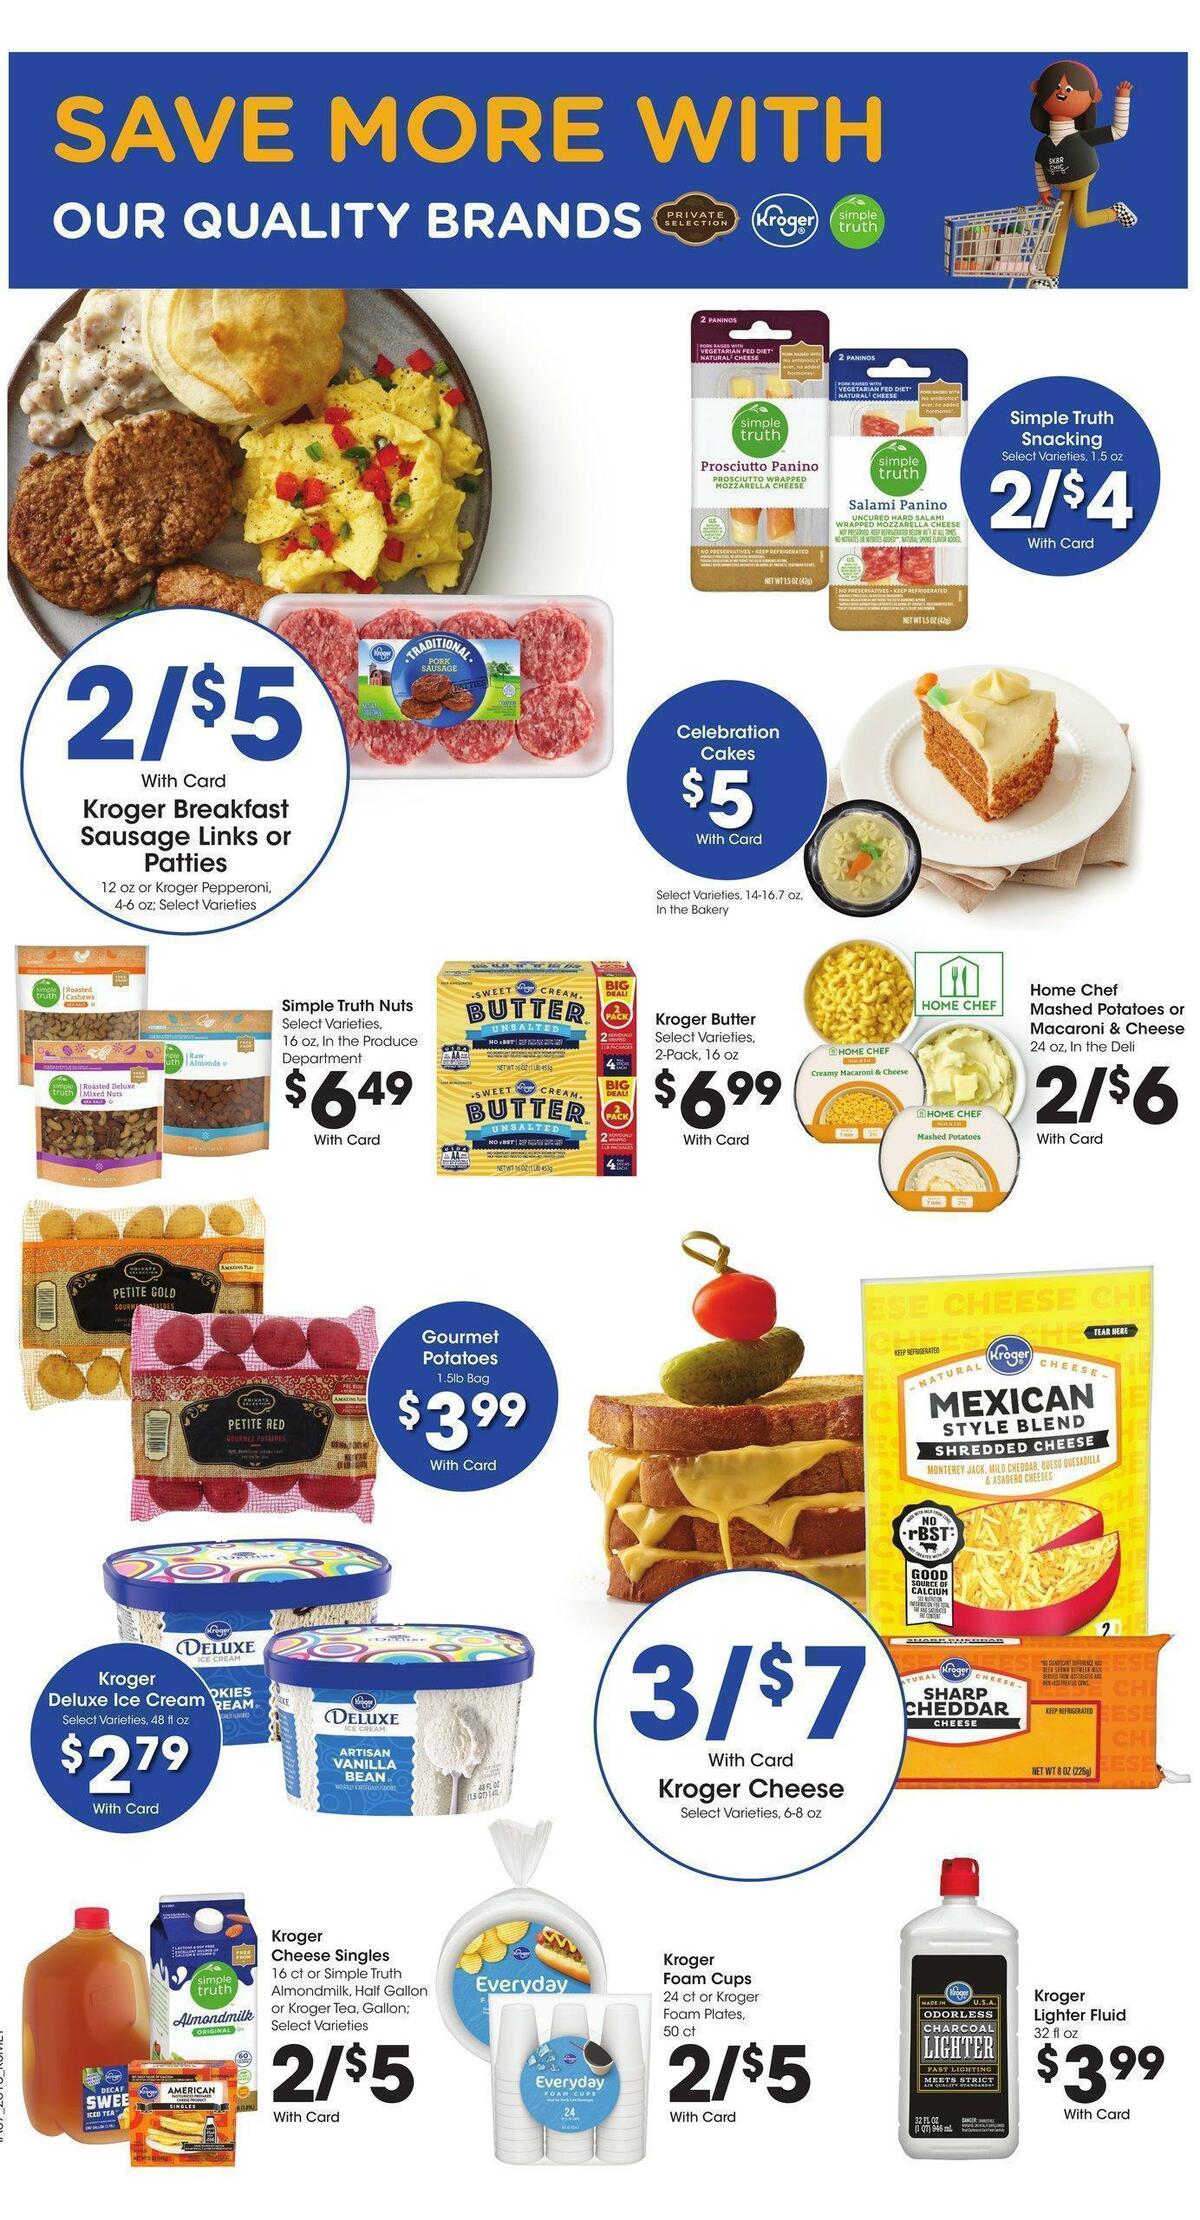 City Market Weekly Ad from May 17